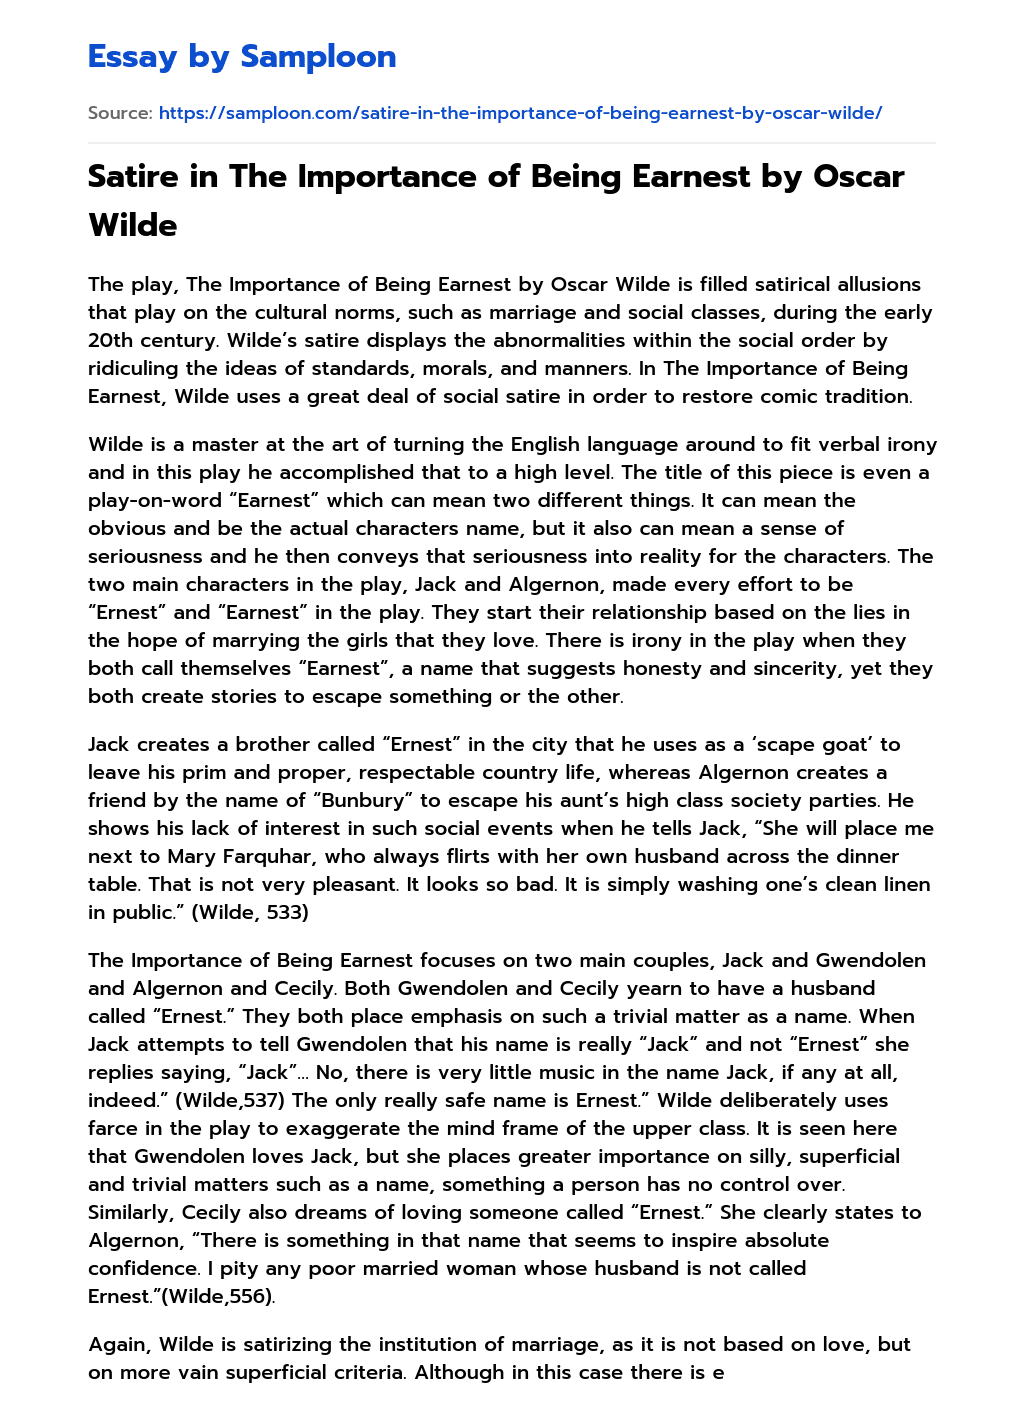 Satire in The Importance of Being Earnest by Oscar Wilde Character Analysis essay